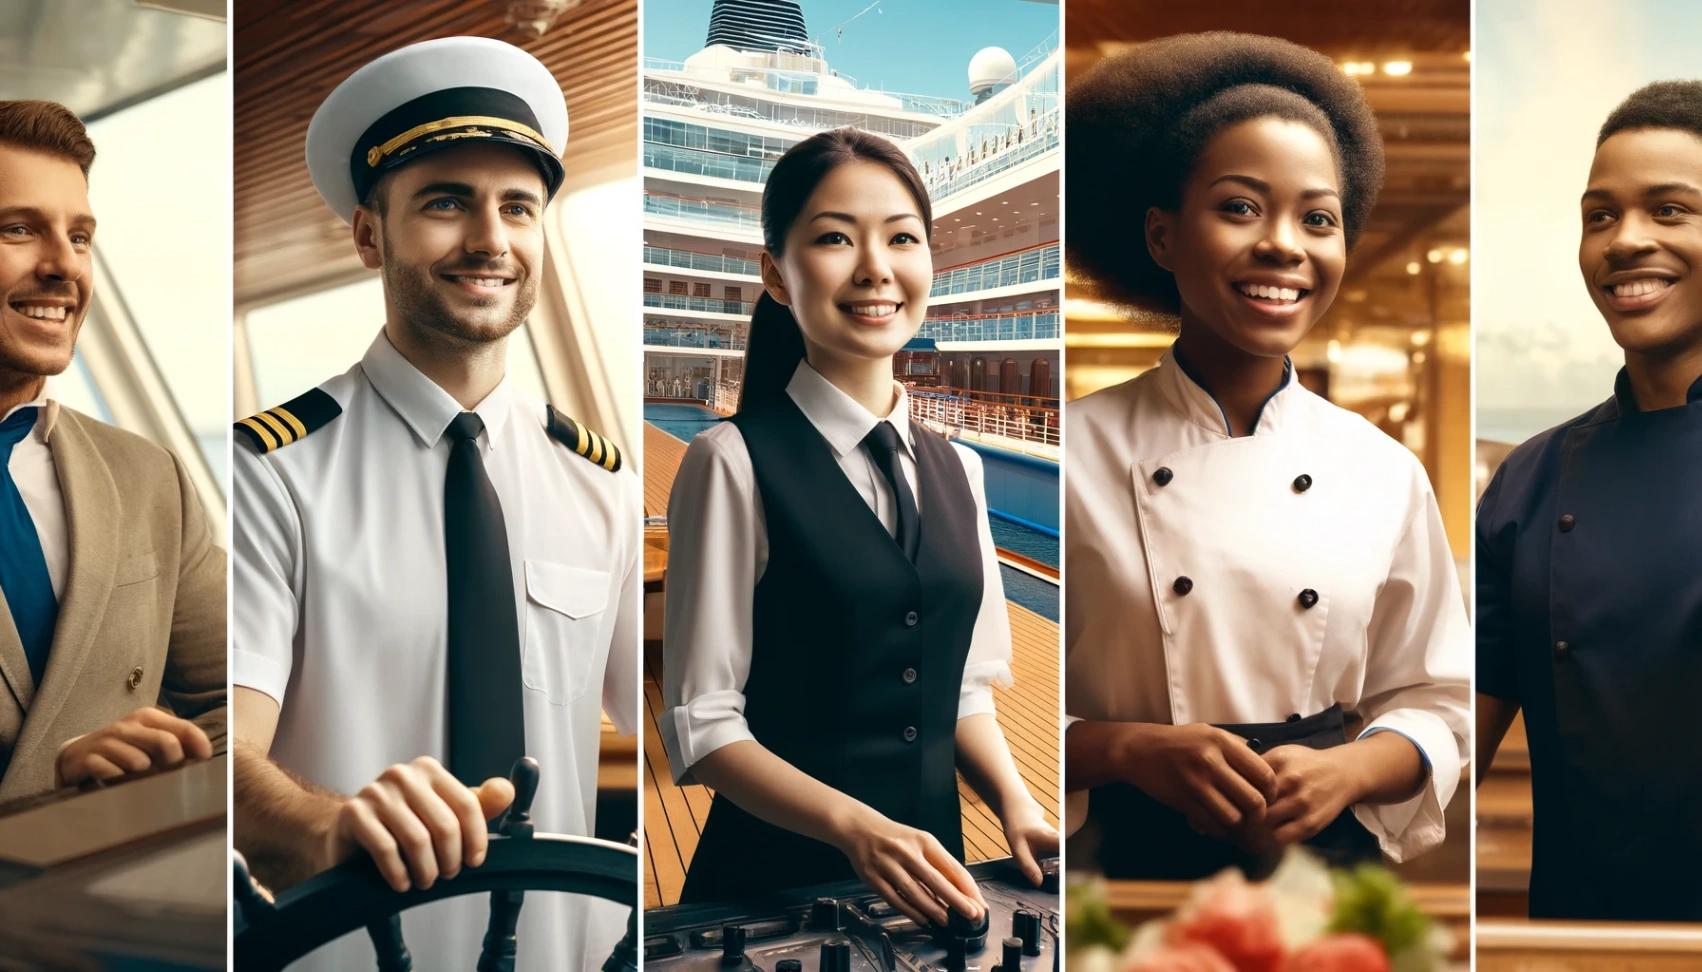 Learn How to Easily Apply for a Cruise Ship Job